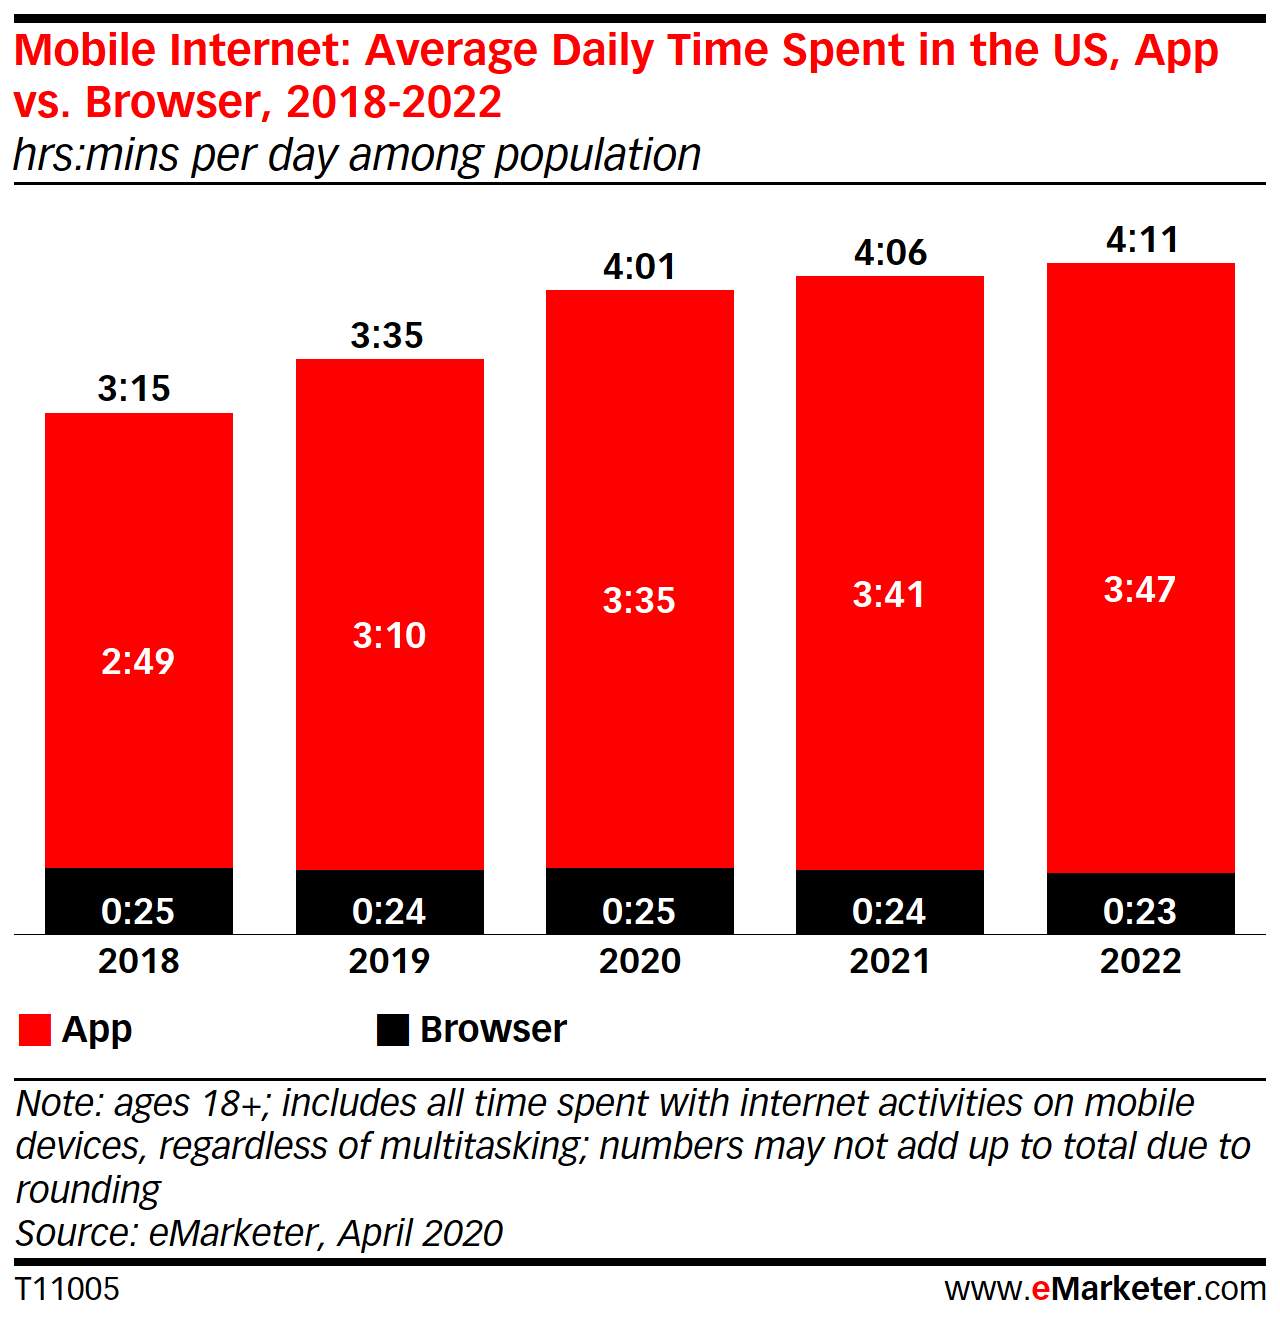 eMarketer data from April 2020 provides stats and estimates on the amount of time U.S. adults spend on their mobile devices. The data for 2021 shows an estimated total time of 4 hours 6 minutes, with 3 hours 41 minutes in mobile apps and 24 minutes in the browser.